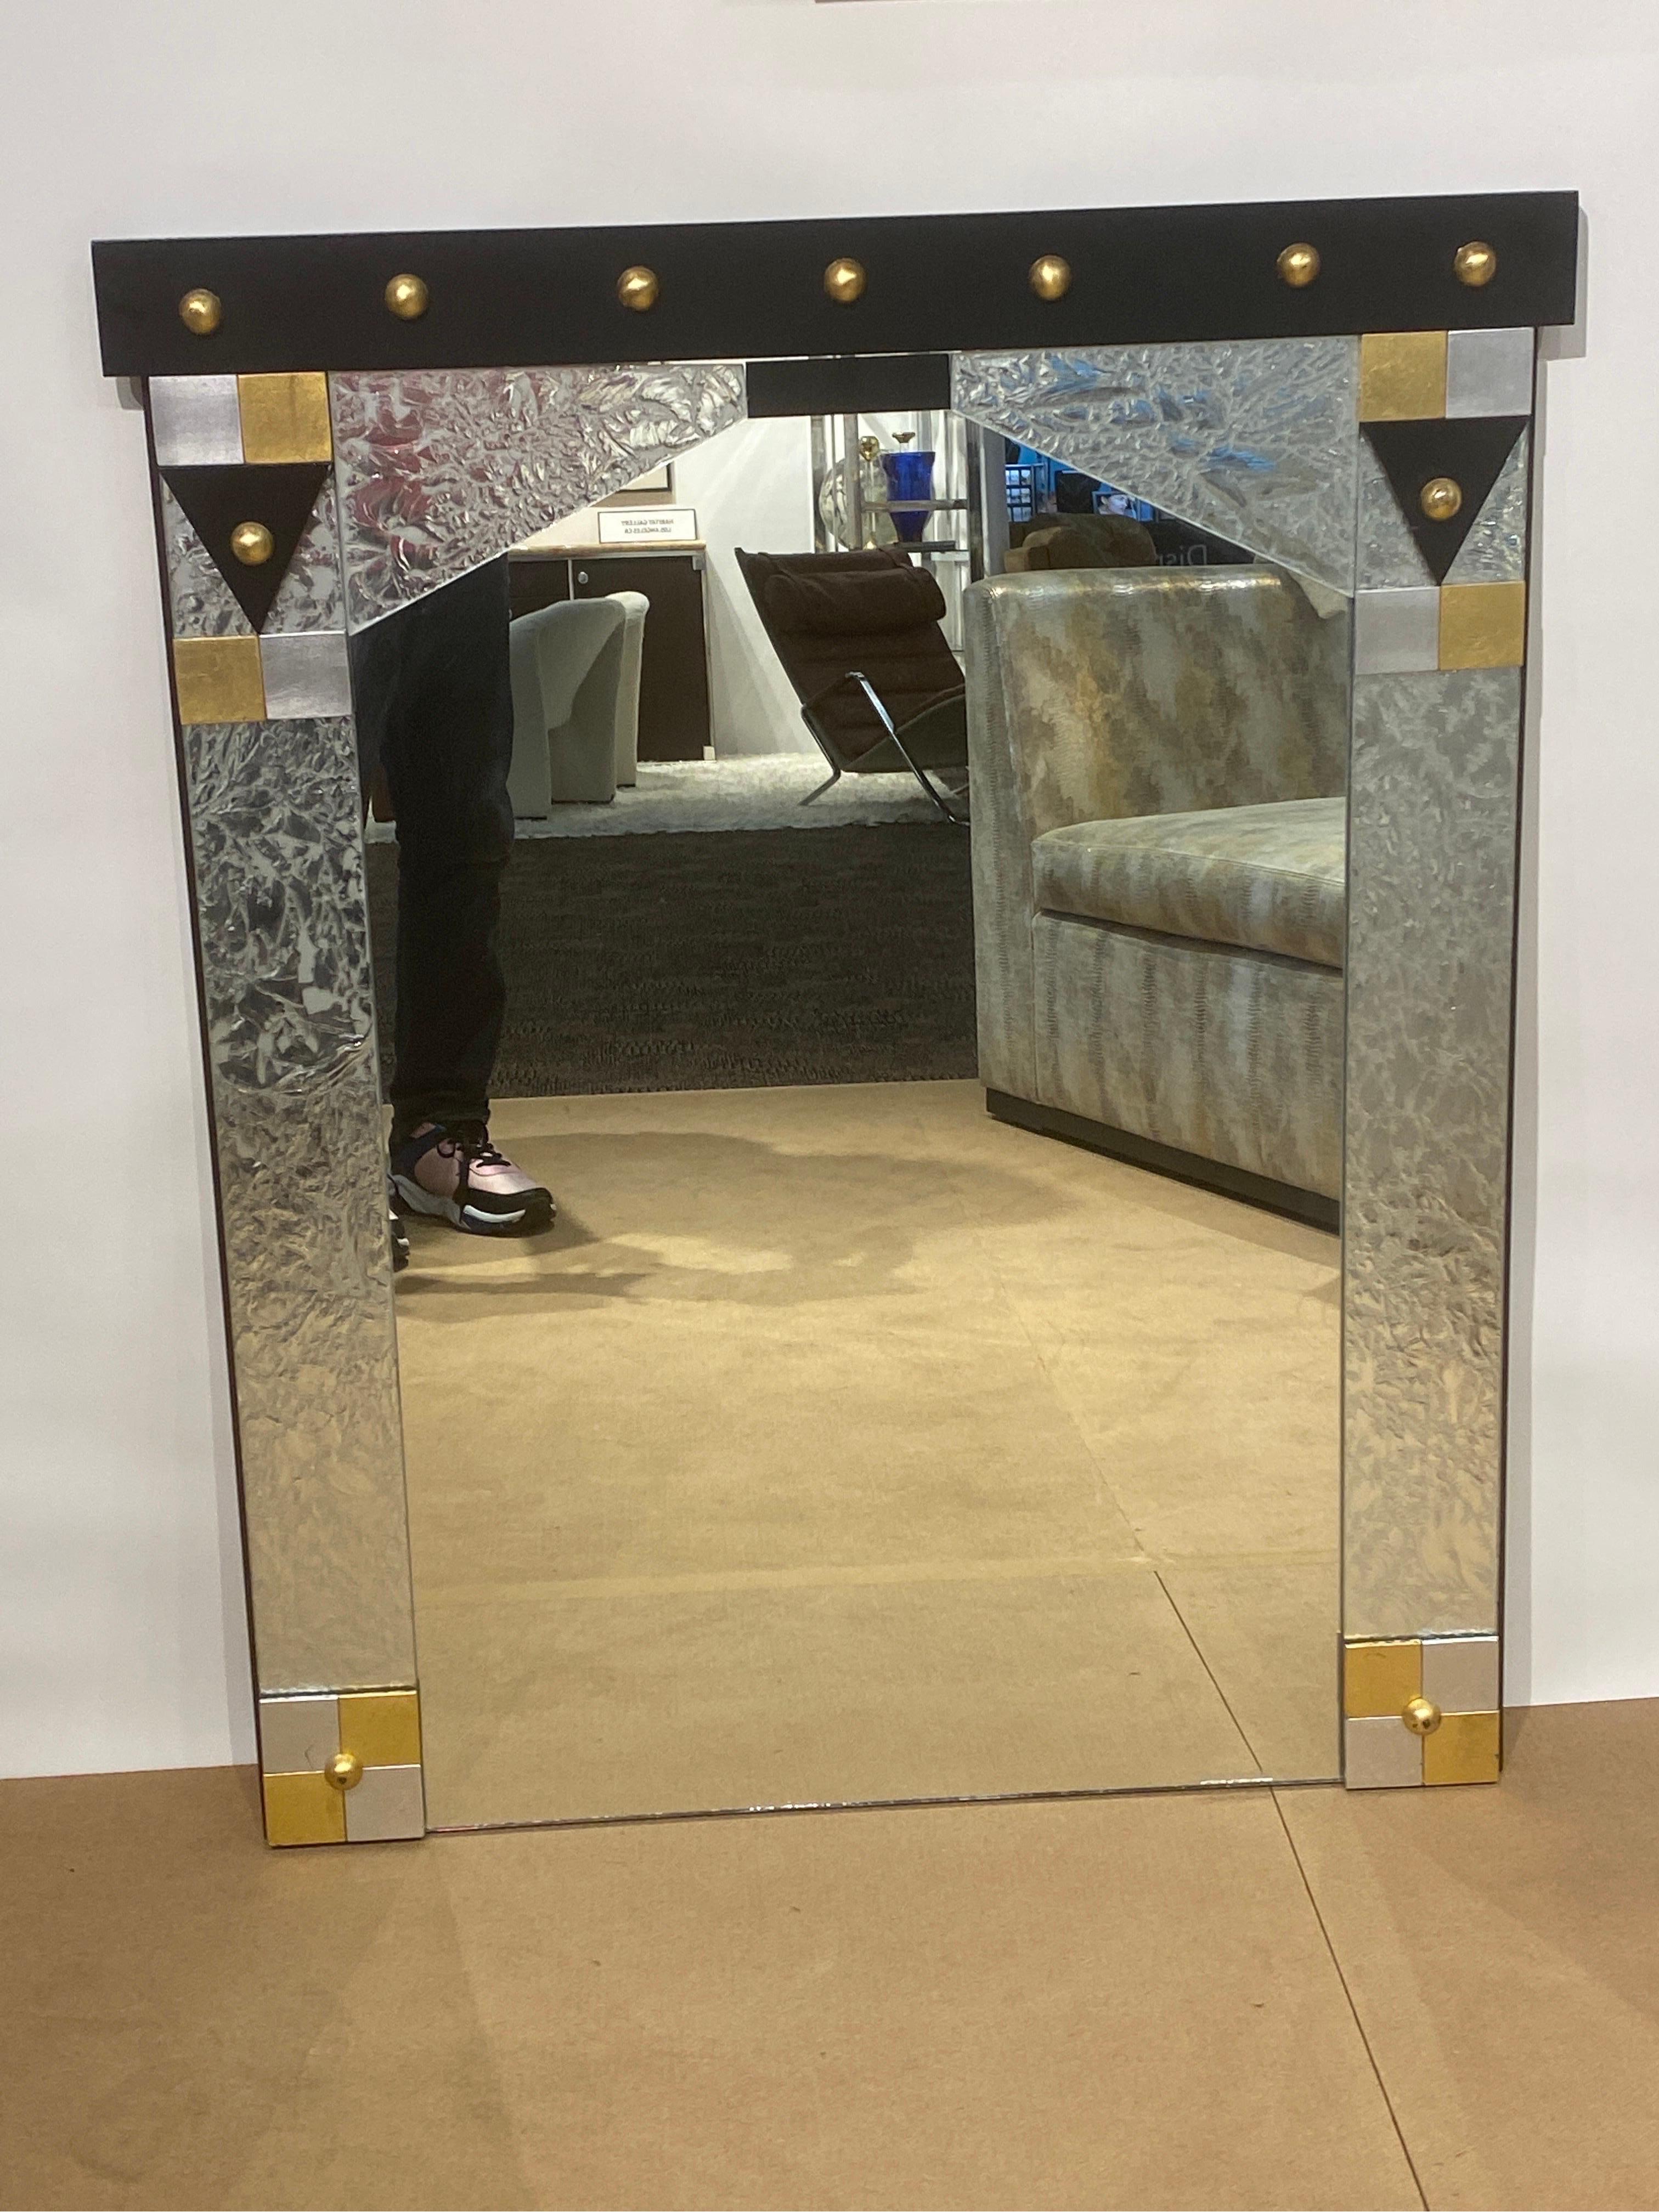 Perfect for a powder room, hallway or bedroom, this is a rare signed piece by David Russell. His mirrors made in the 1980s were very high end and are now extremely and sought after. 
This is the best example if his work I have seen. Post modern in